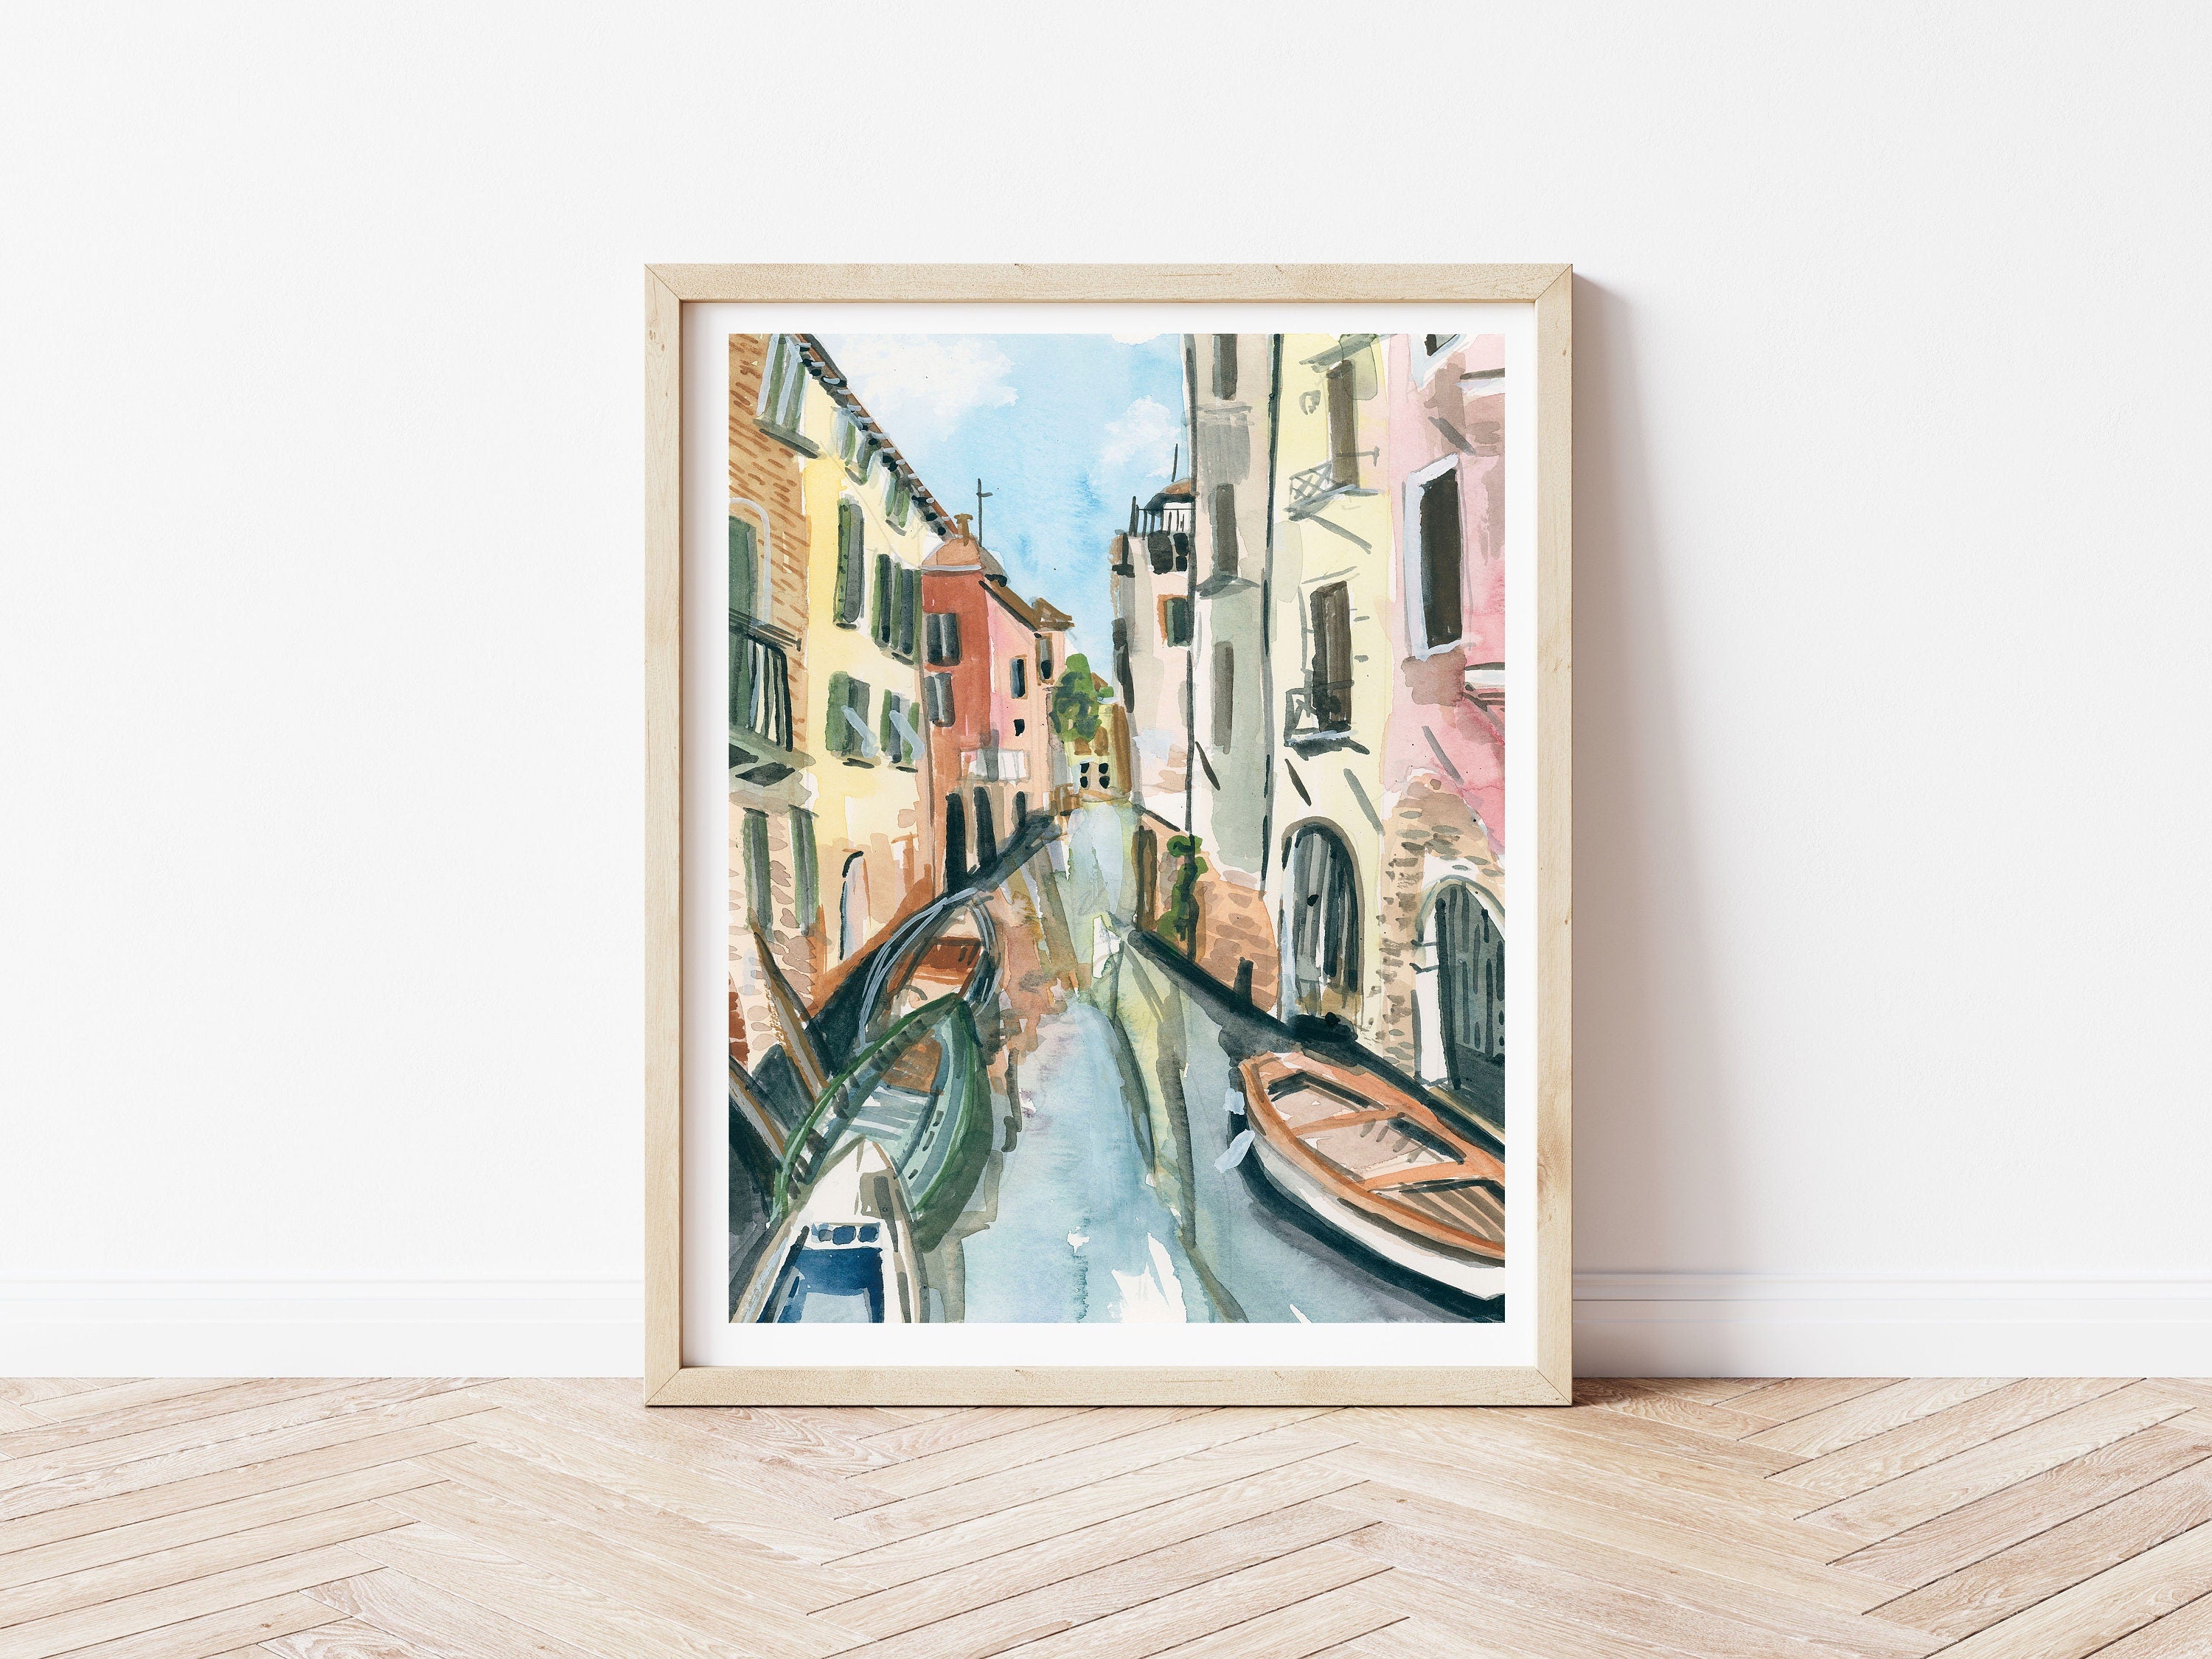 Venice canal print of painting by Medjool Studio. Print of an original gouache painting of the Venice Canal, including iconic buildings, from the perspective of being in a boat.